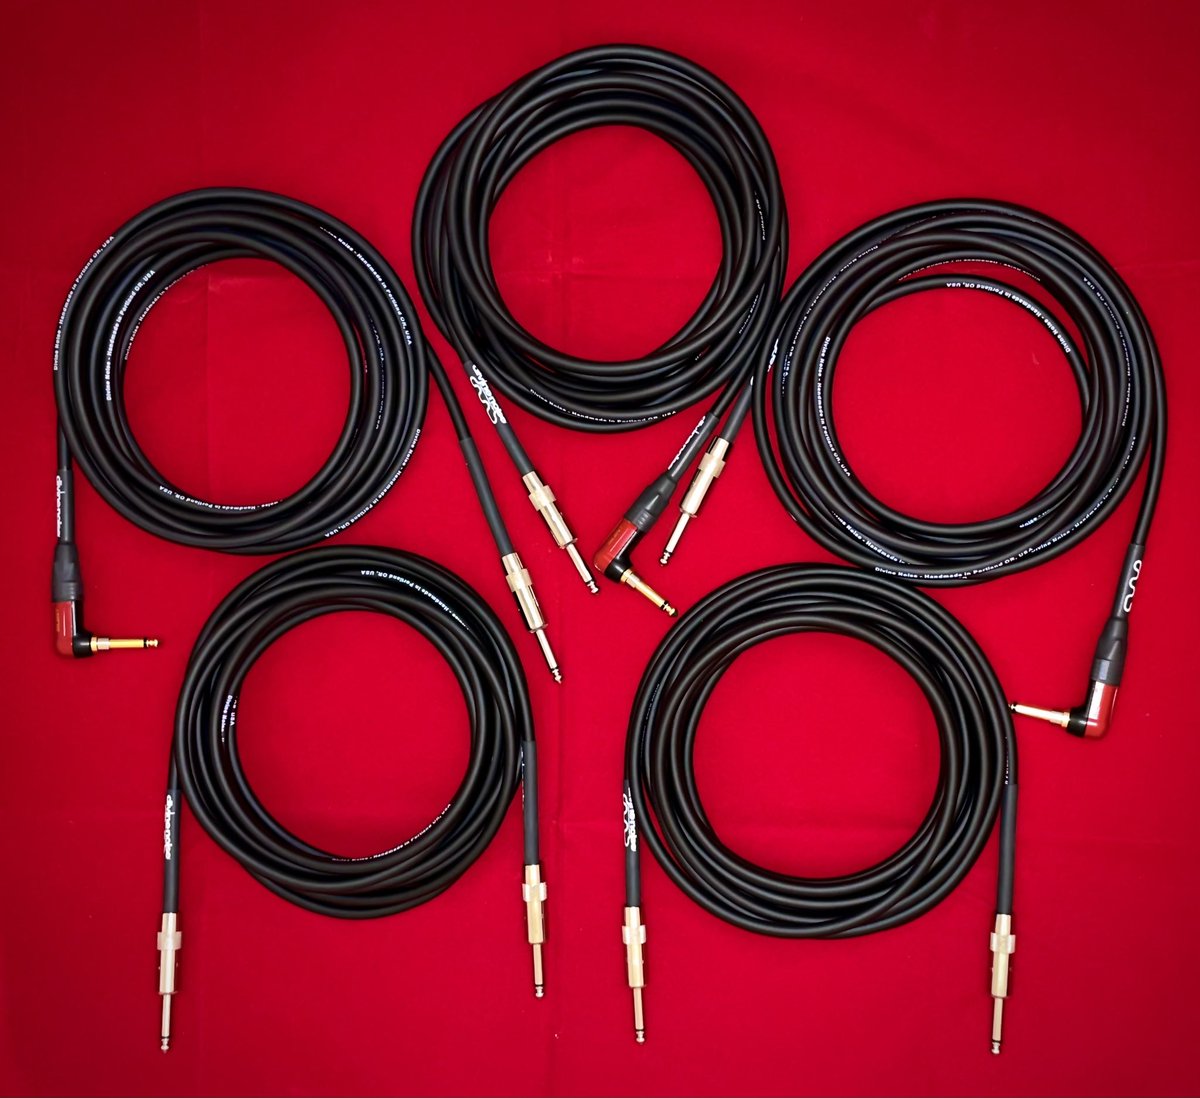 Here’s a pic of some cables that went out to @lukasnelson  last week.  Go see ‘em on tour starting this Sunday in North Carolina! 

#knowyourtone #instrumentcable #guitartech #lukasnelson